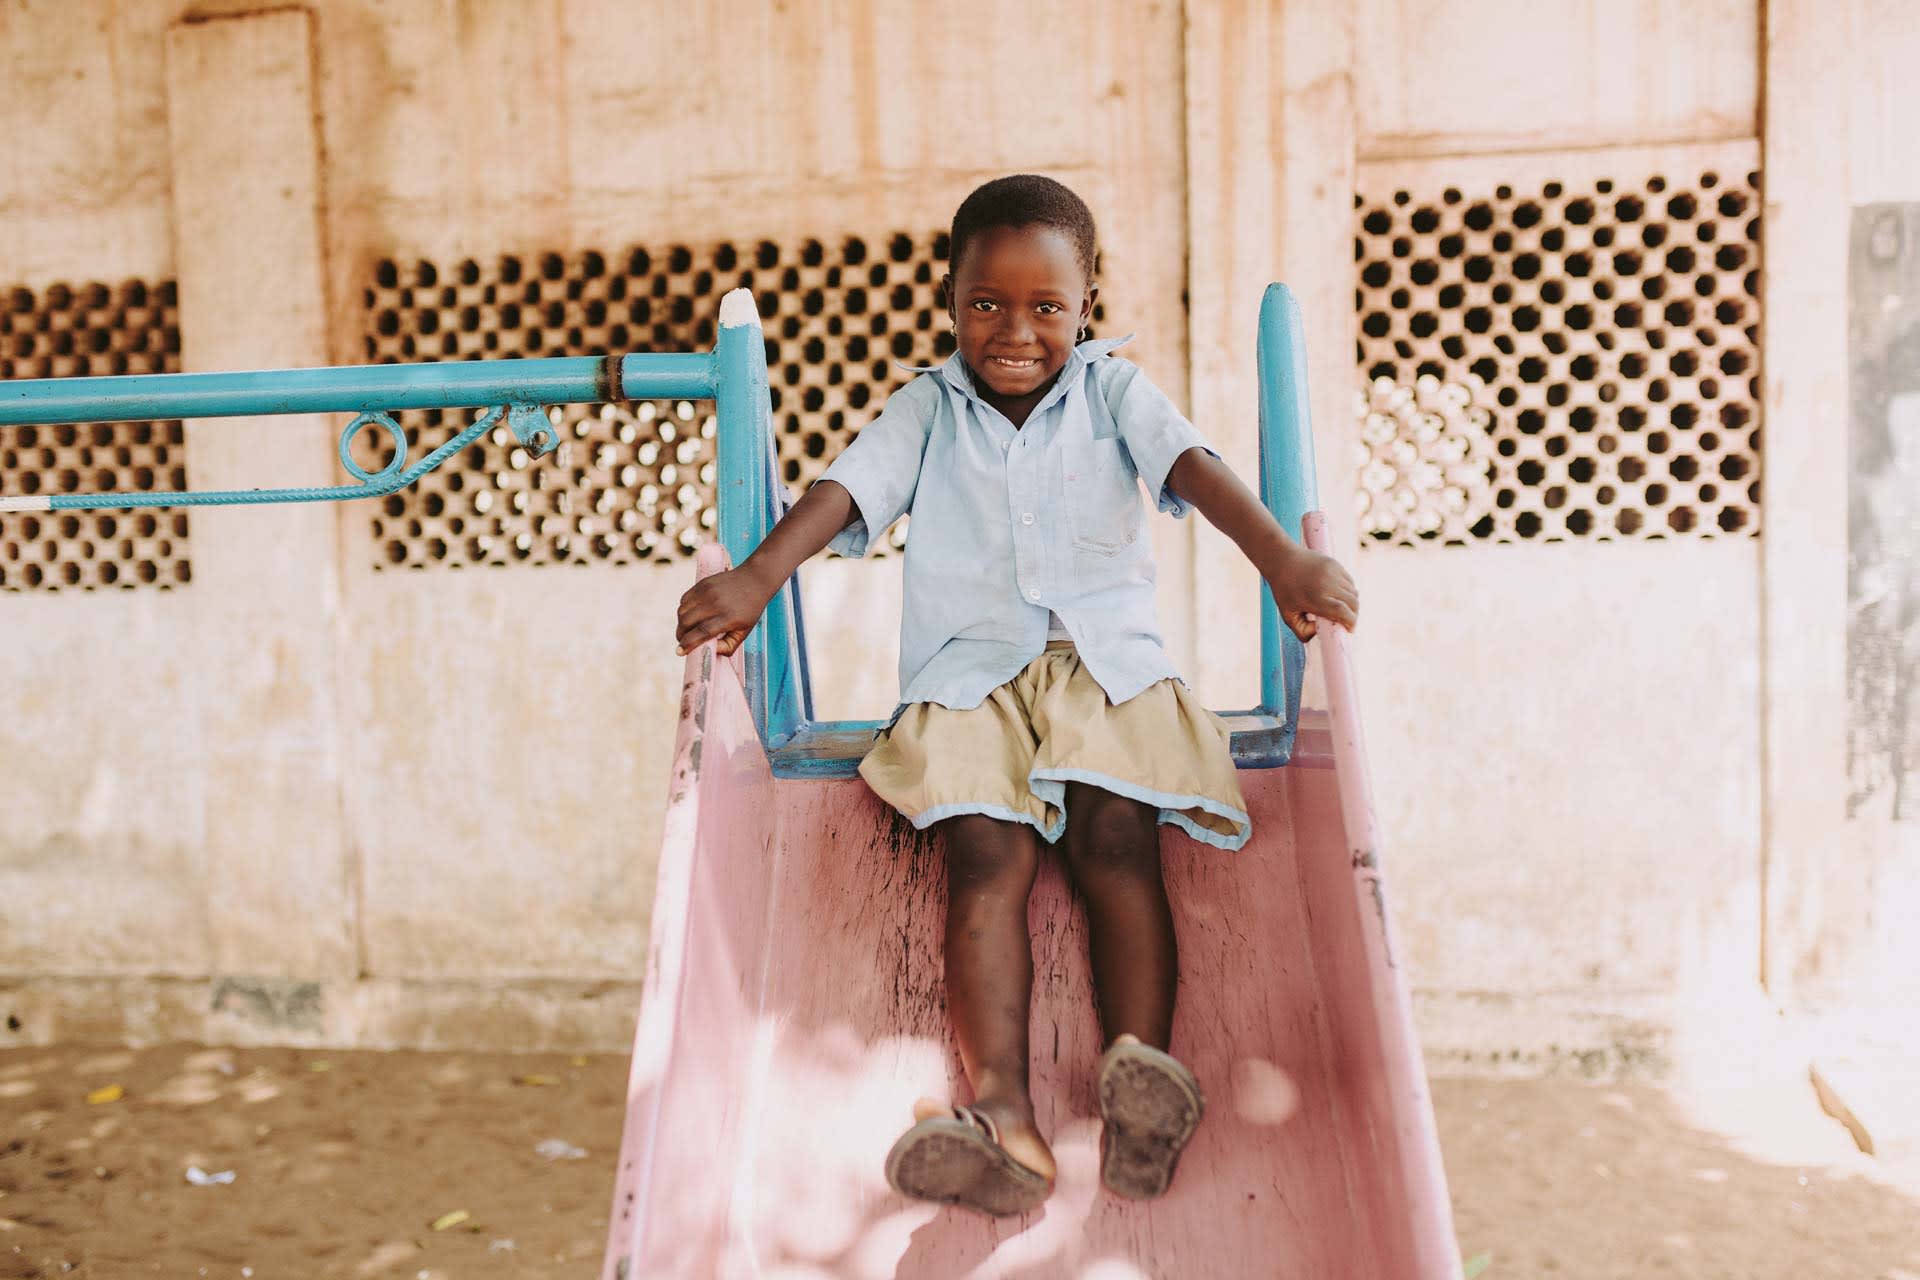 Aklobessi, girl, child, wearing a blue shirt, brown skirt, small earrings, smiles as she is playing, play time, play, sliding down the slide outside at the center on the playground equipment.